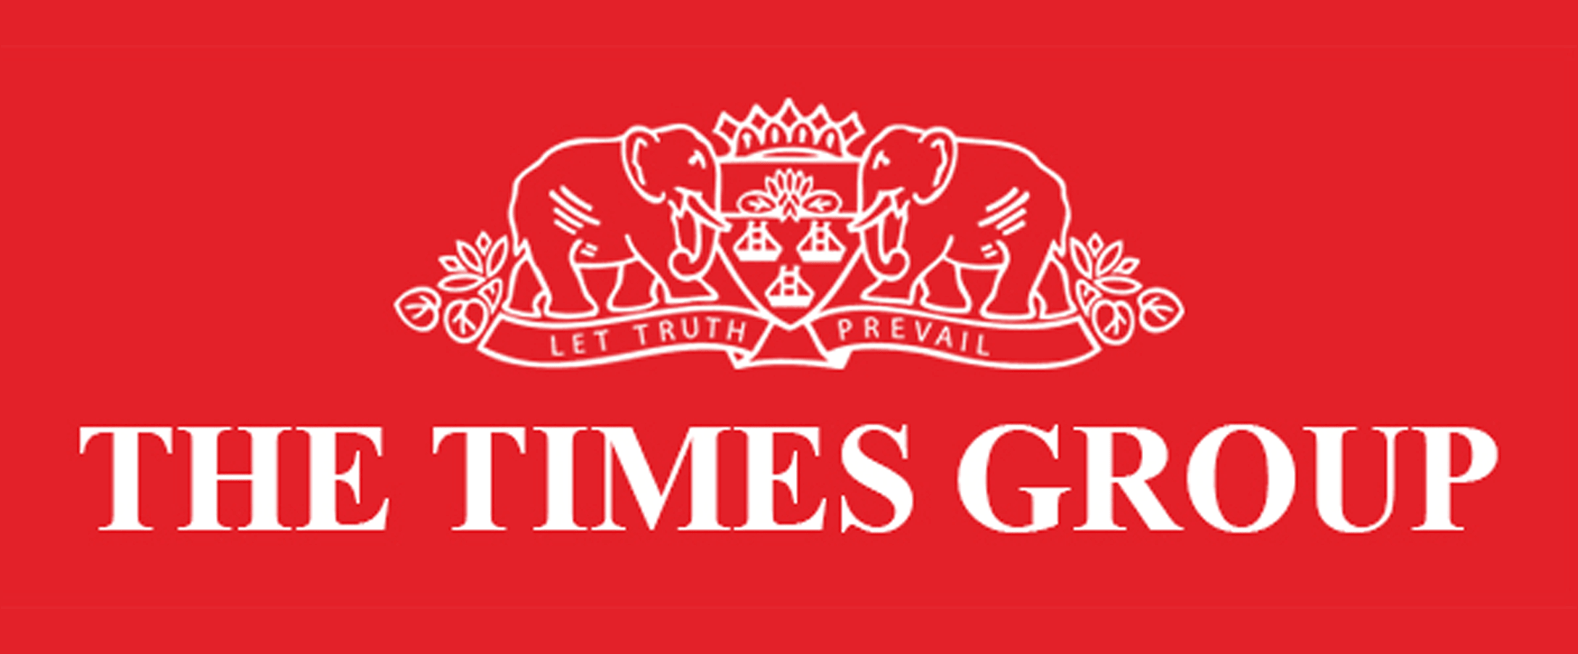 The times group logo